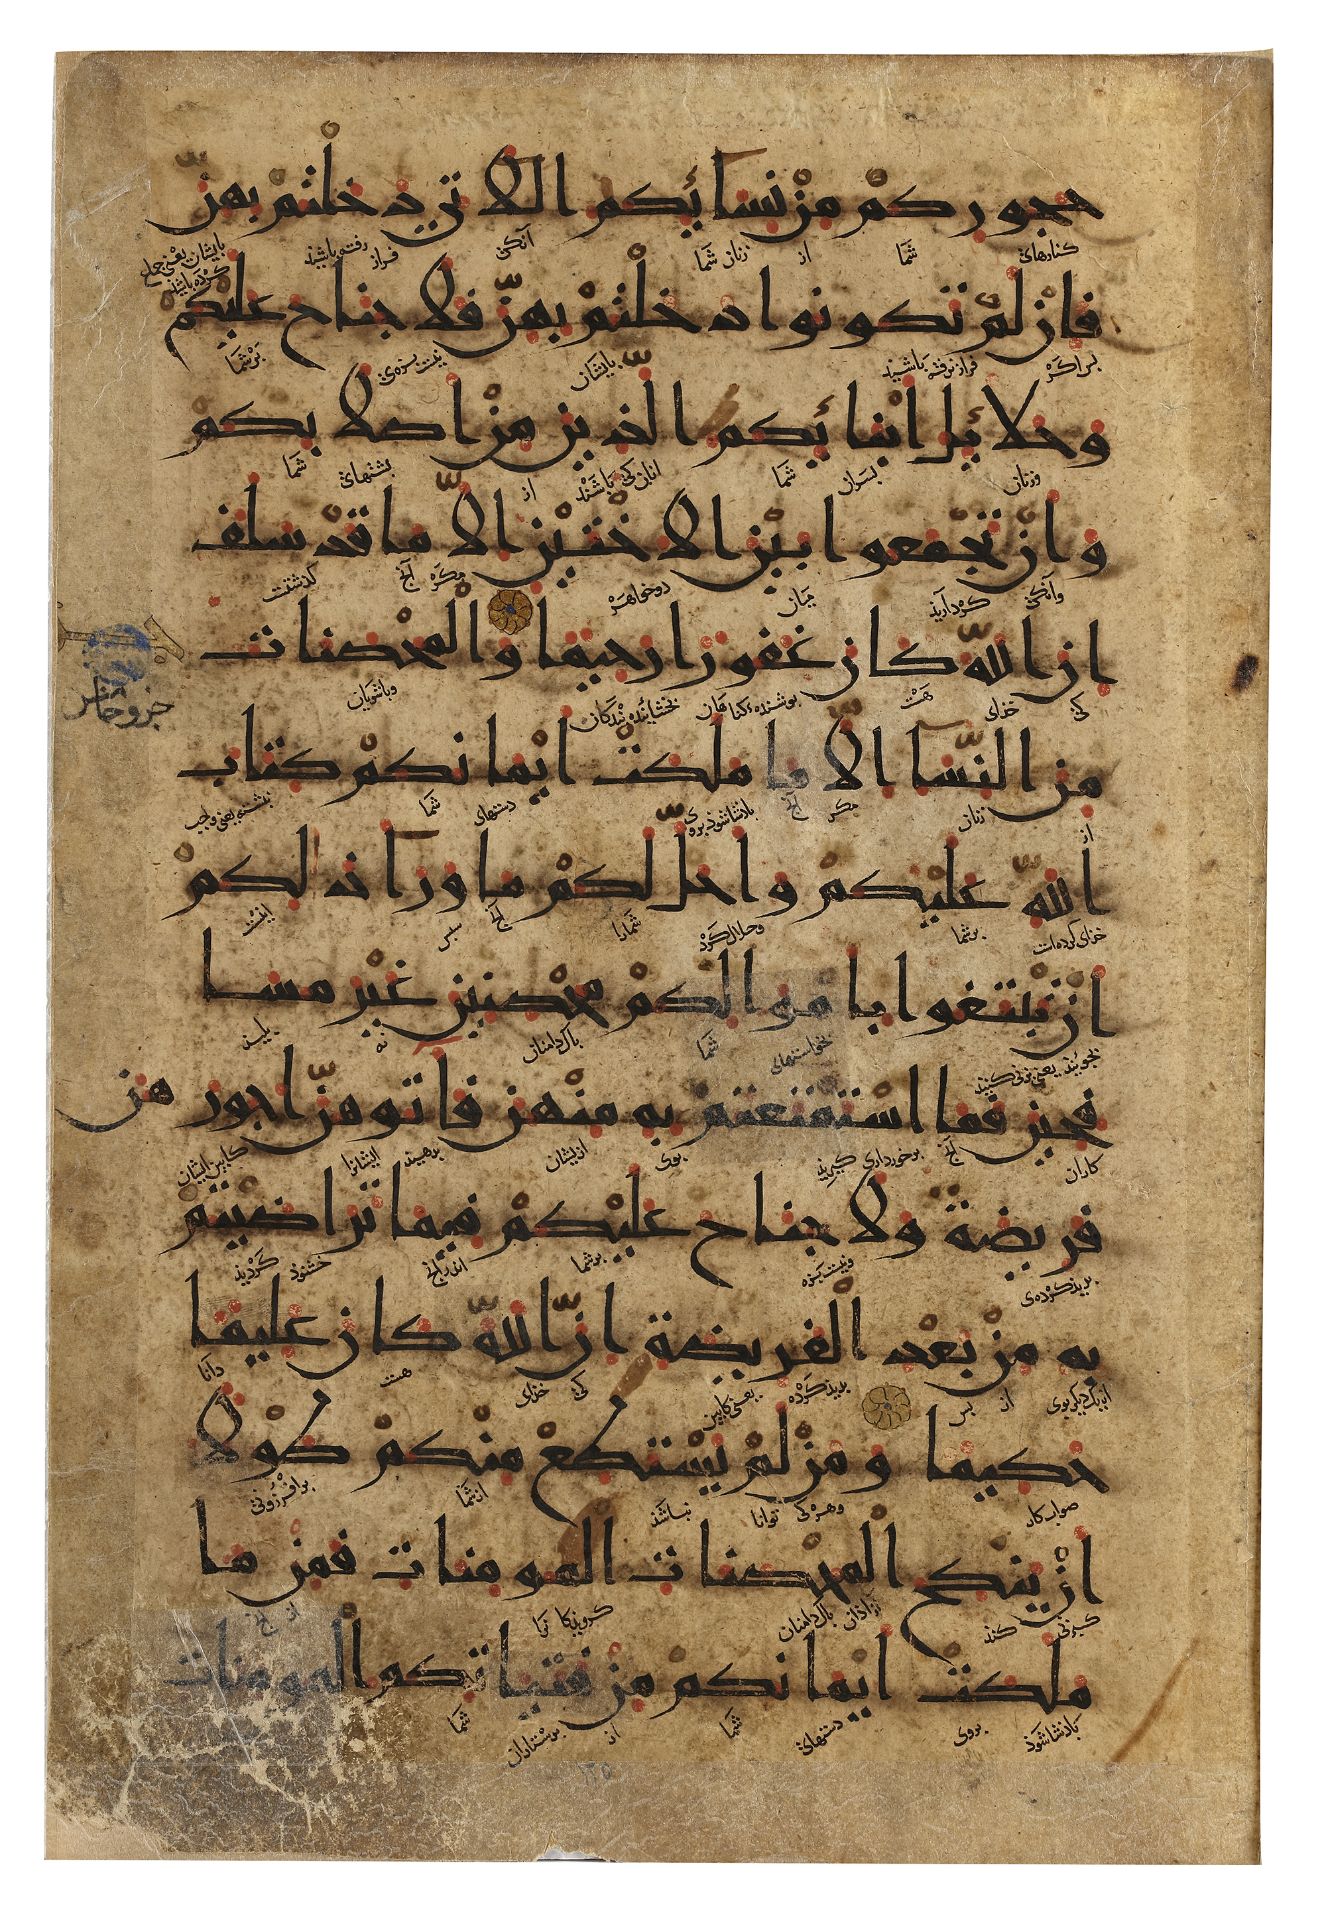 AN EASTERN KUFIC QURAN FOLIO, NEAR EAST, 12TH CENTURY - Image 3 of 4